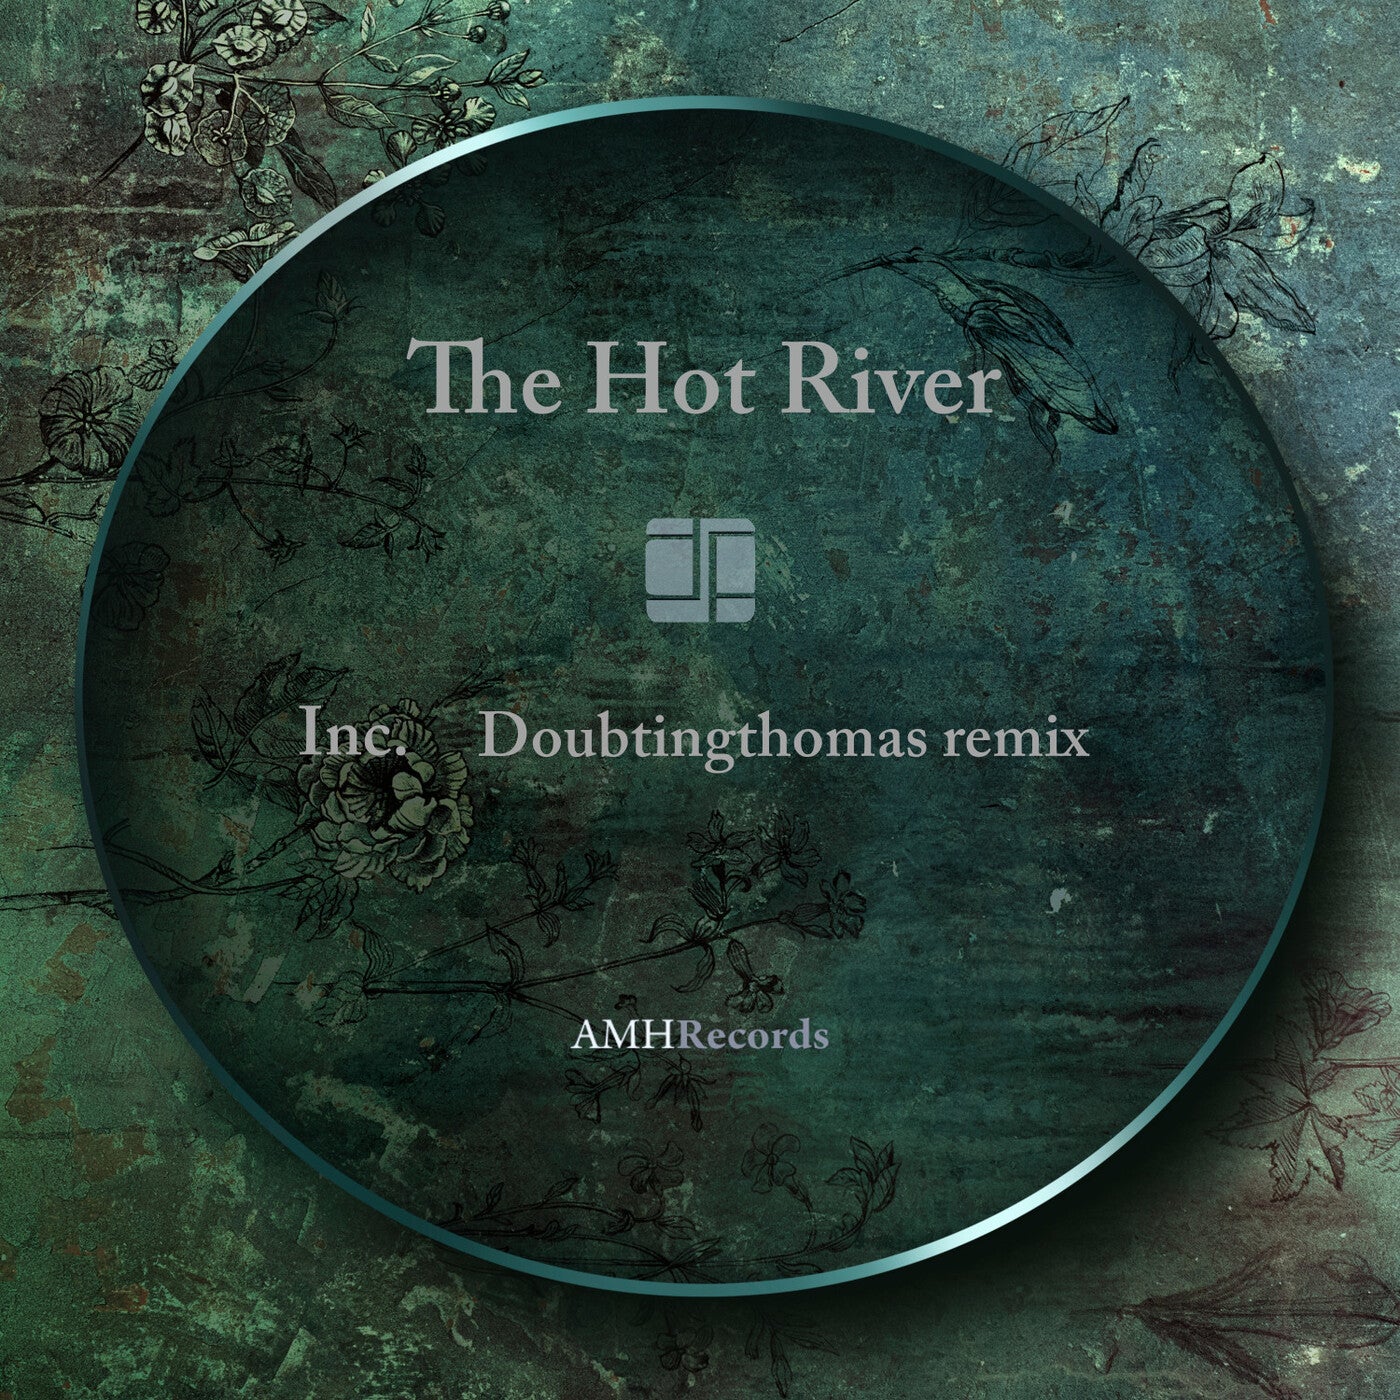 The Hot River